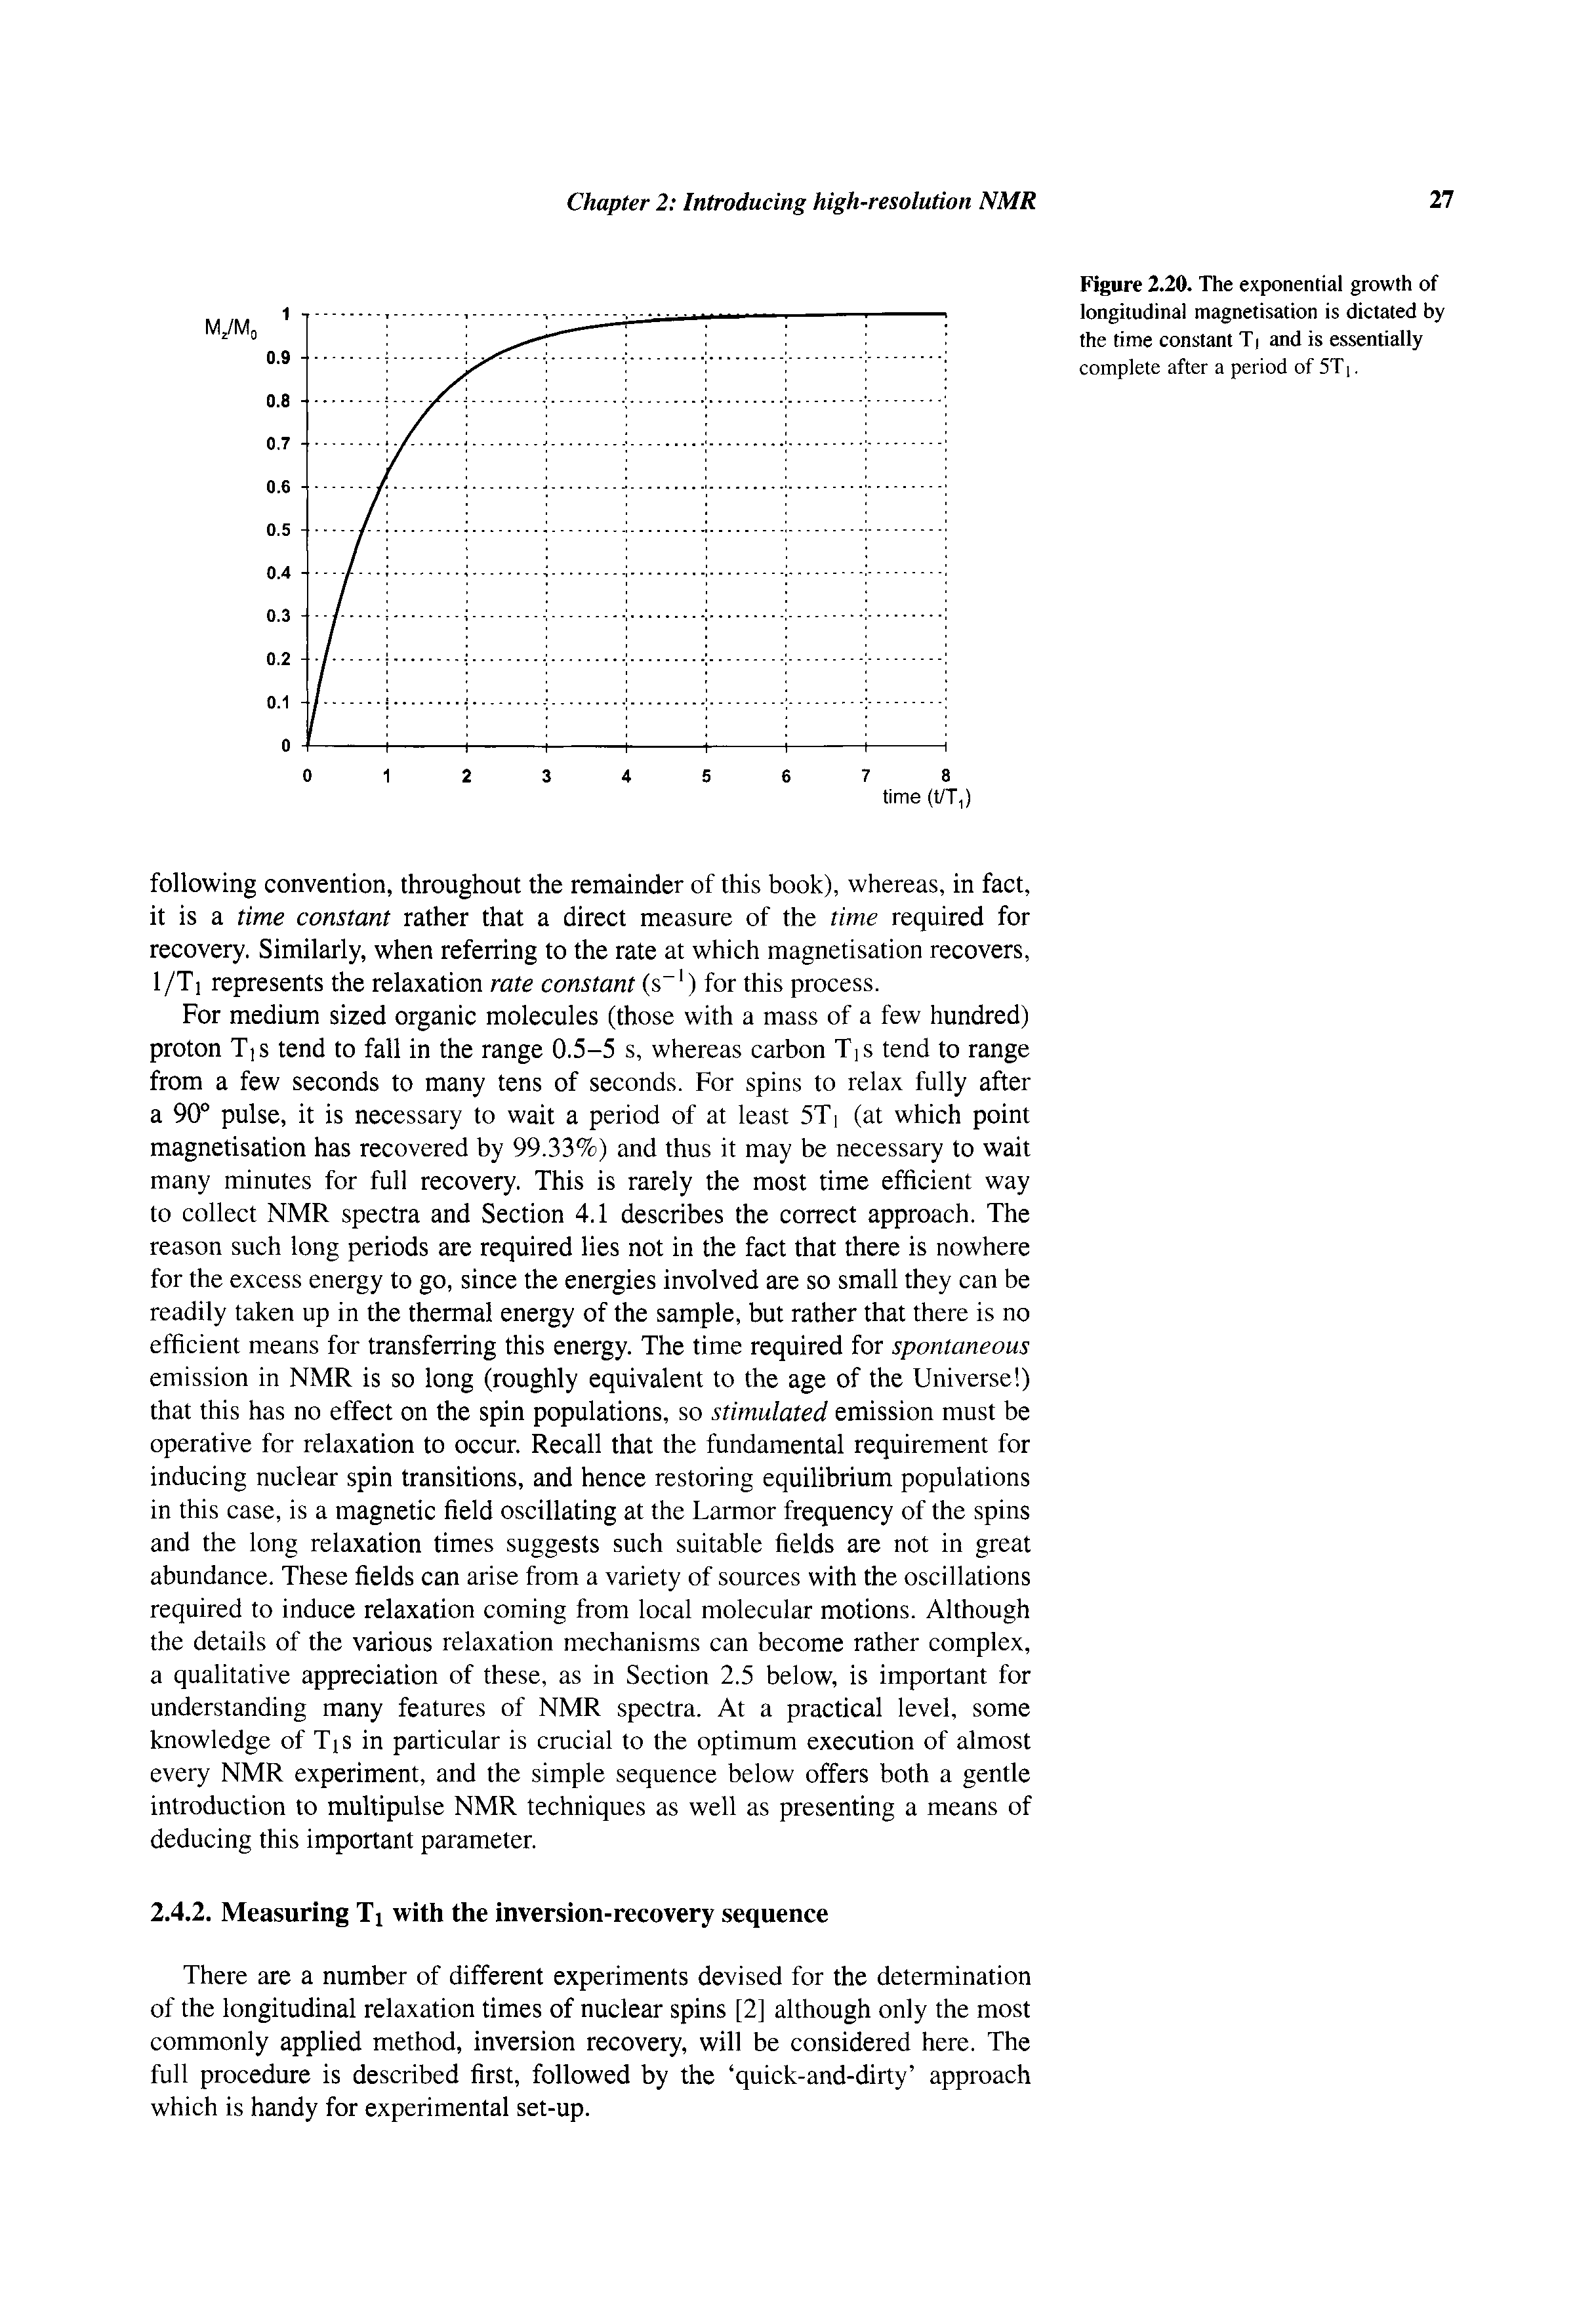 Figure 2.20. The exponential growth of longitudinal magnetisation is dictated by the time constant Ti and is essentially...